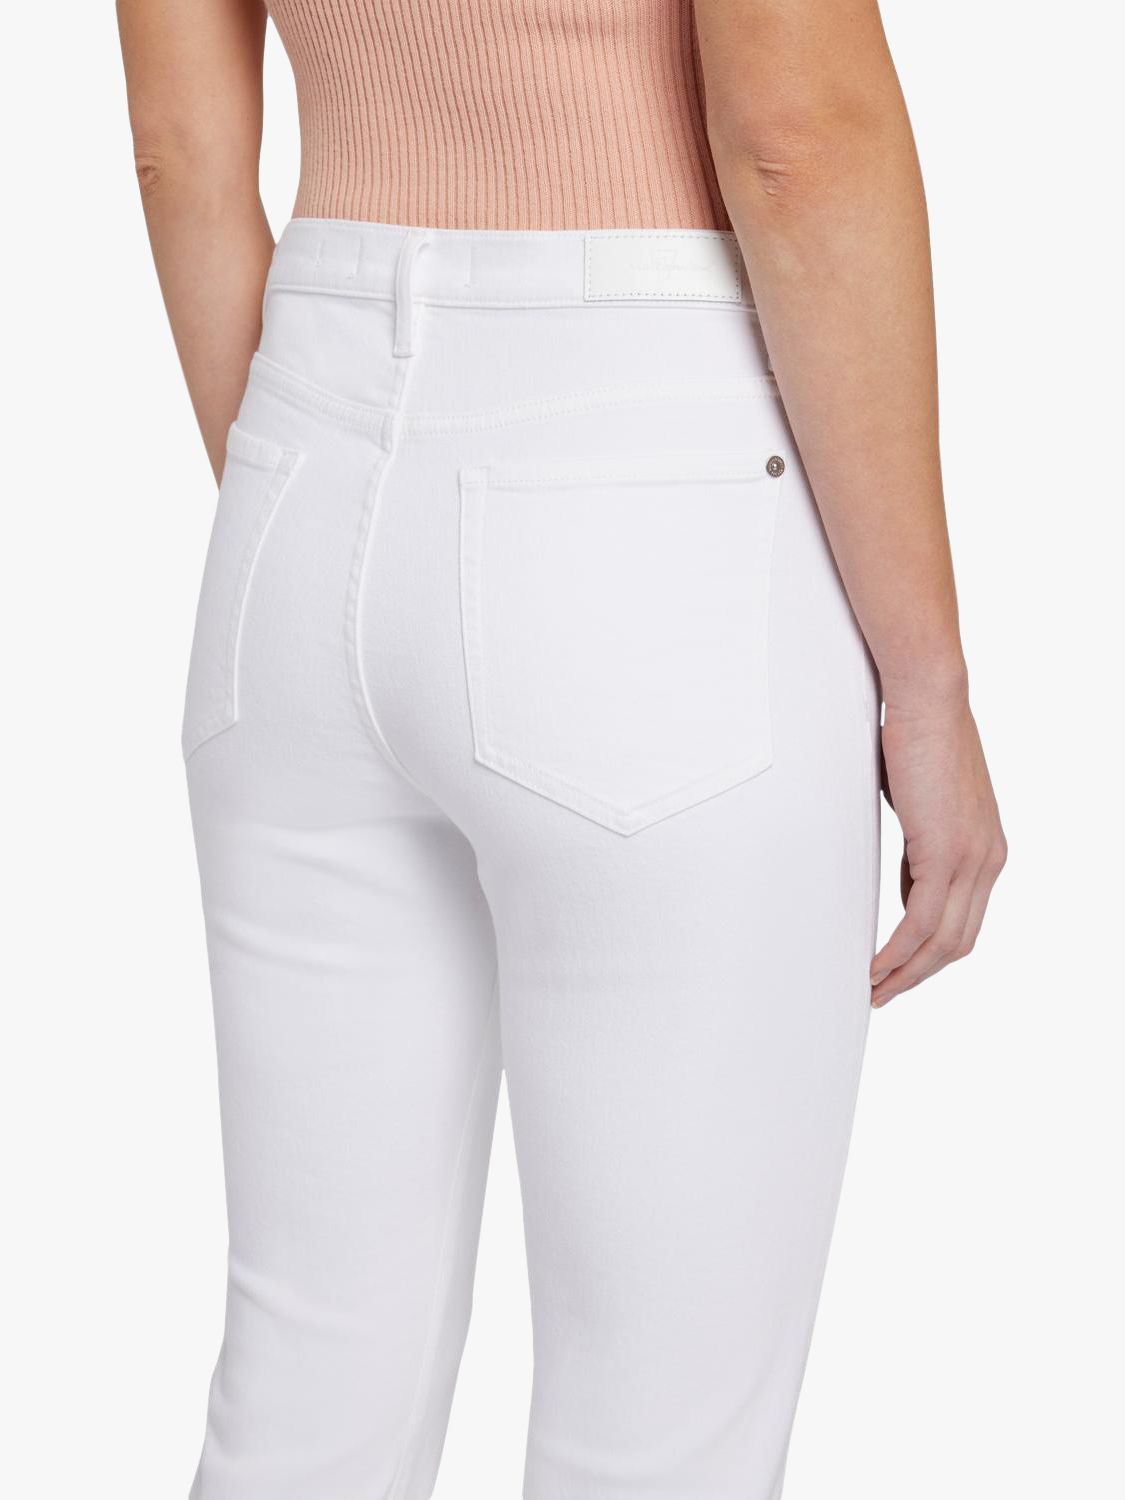 7 For All Mankind Easy Slim Jeans, White, 28